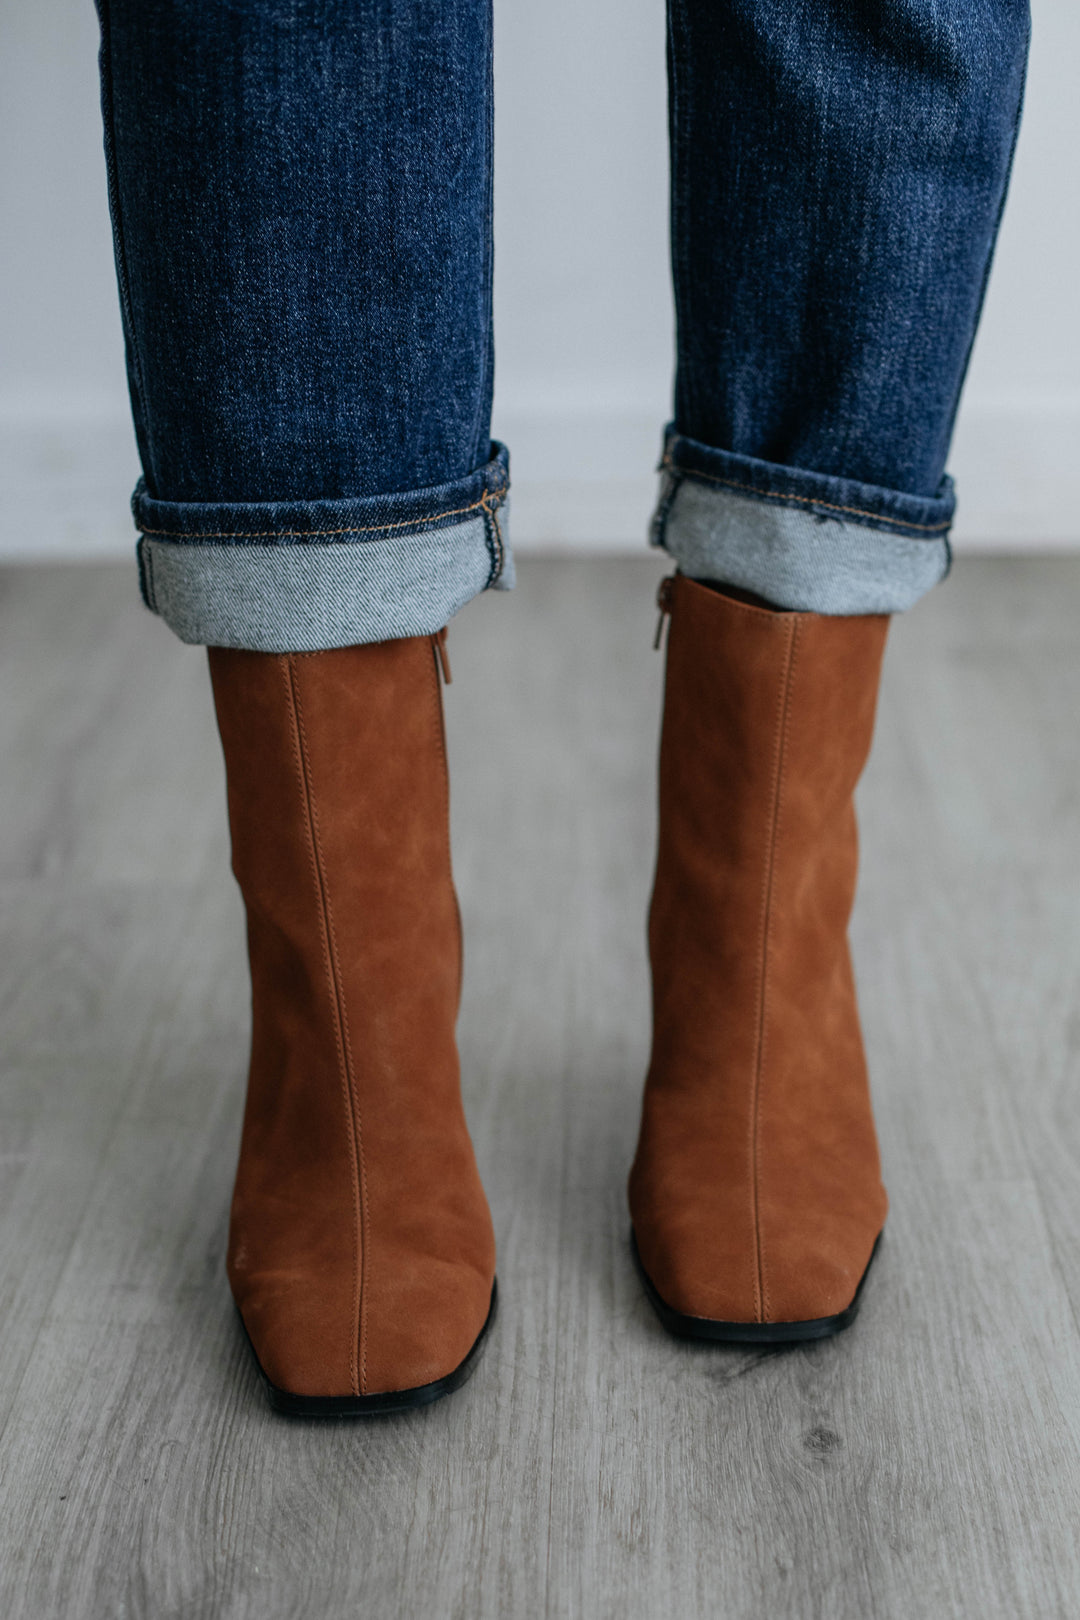 Going Out Tonight Boots - Chestnut